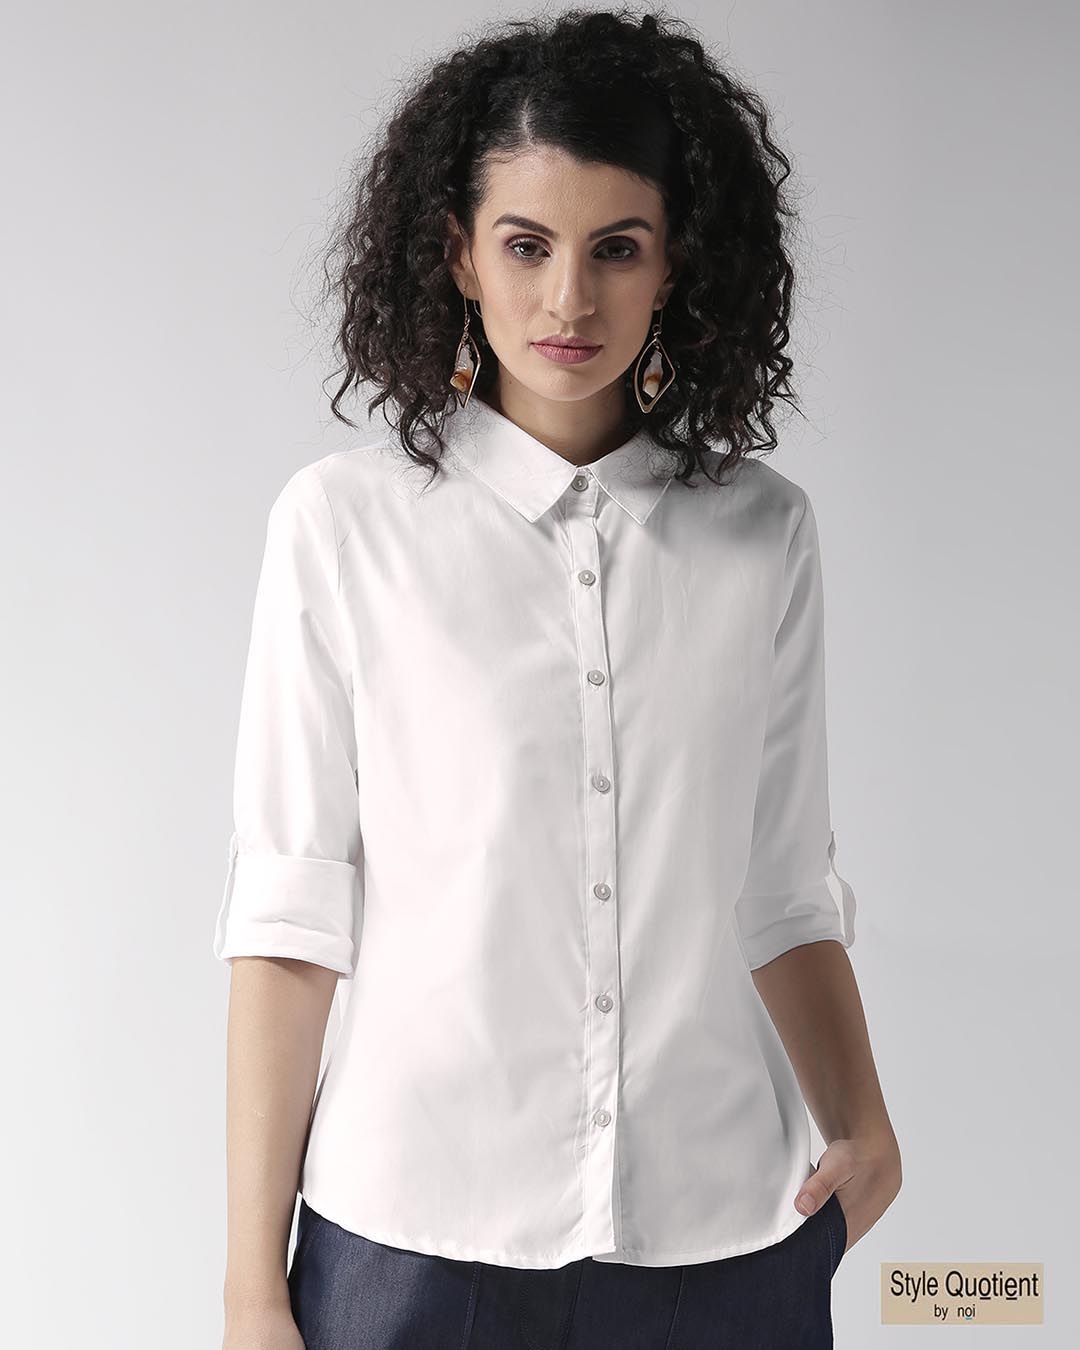 Buy Style Quotient Women White Regular Fit Solid Casual Shirt Online At